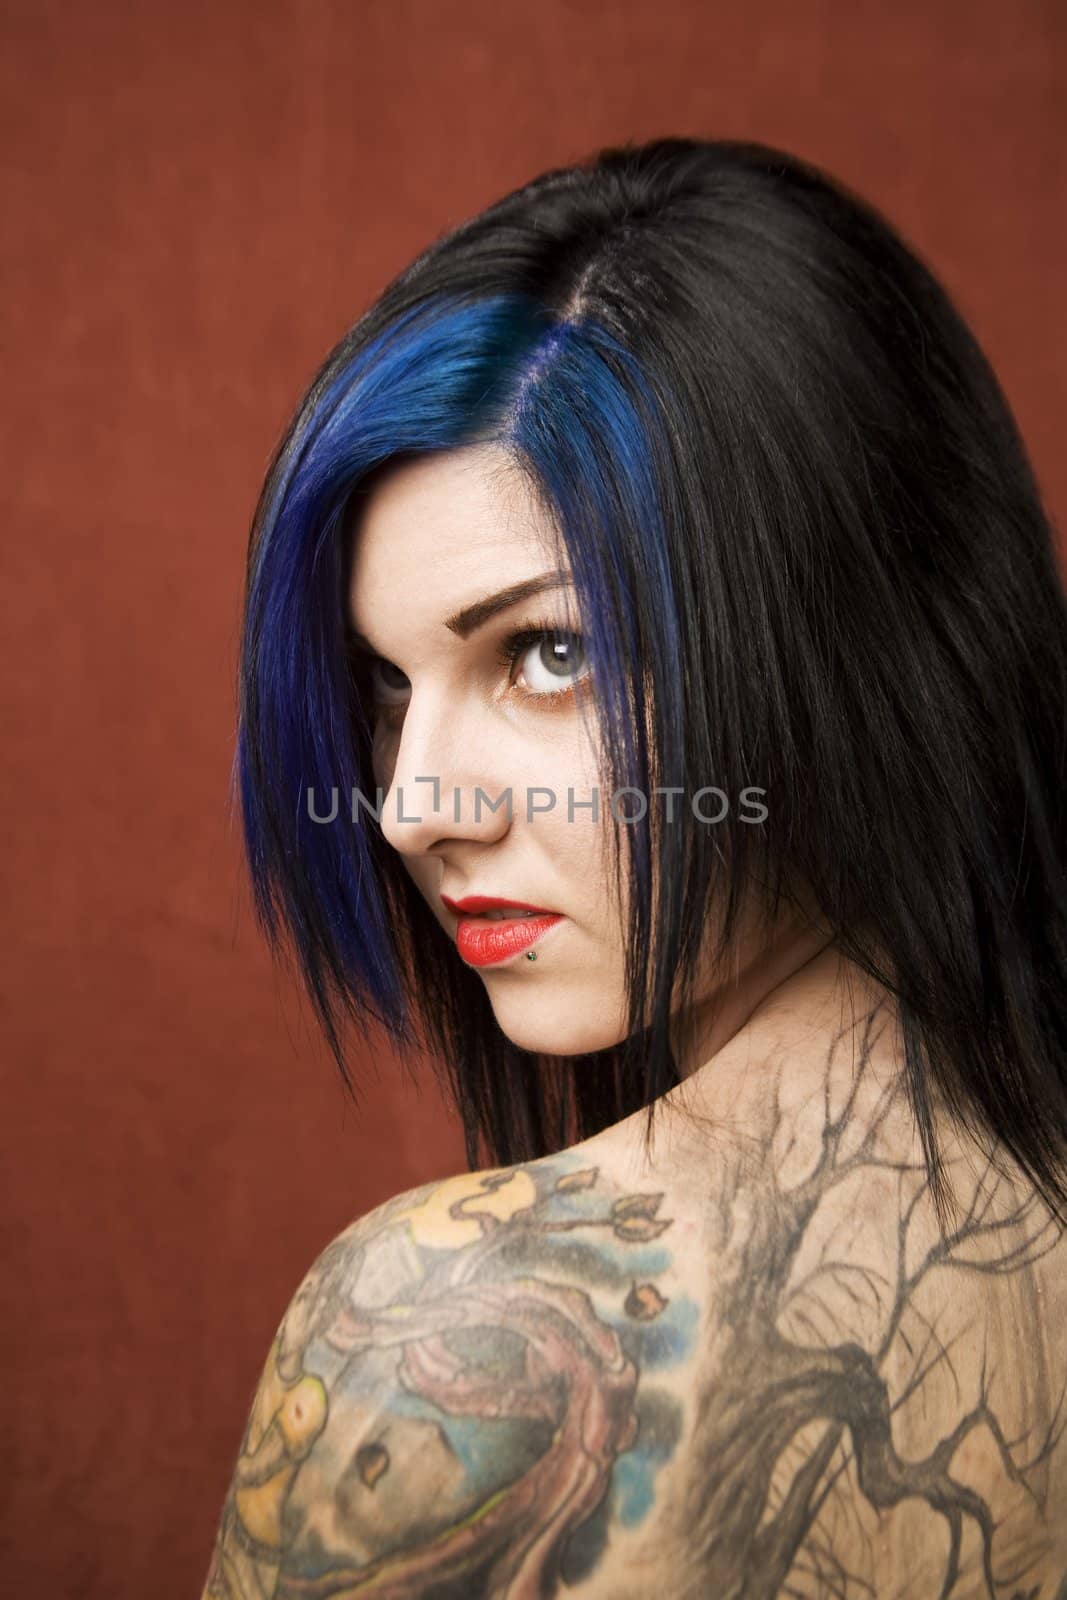 Pretty woman with many tattoos by Creatista